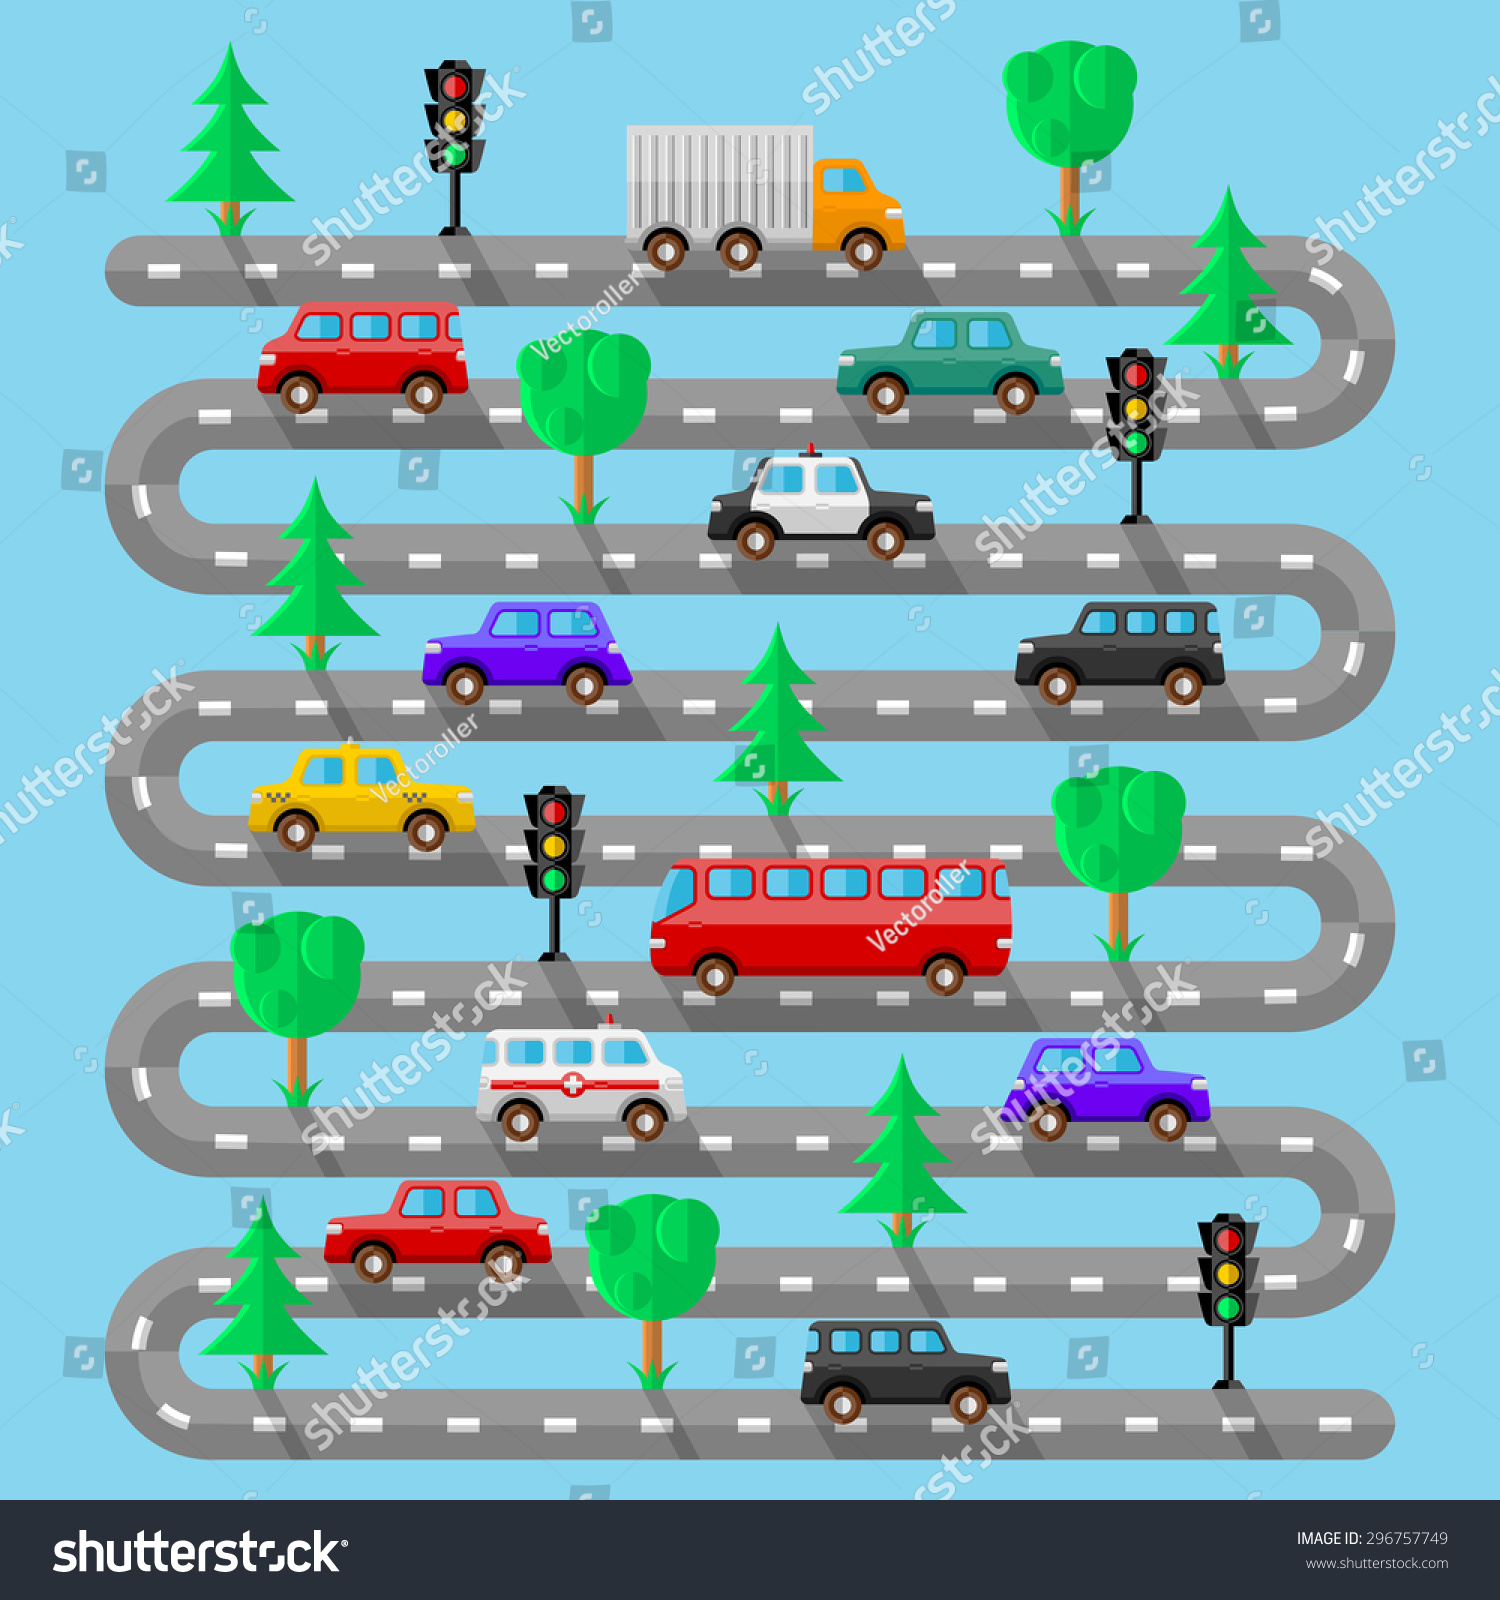 Highway with vehicles. Flat design. Vector illustration.
 #296757749